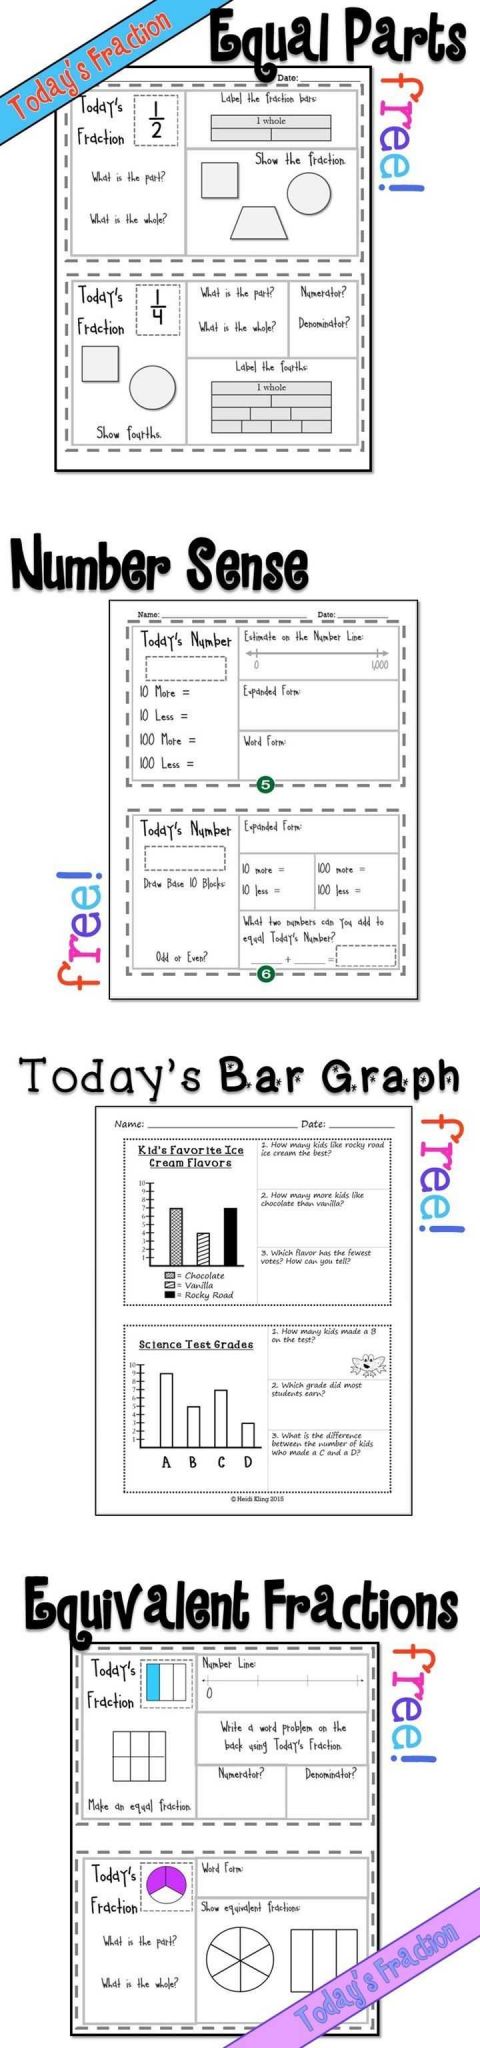 Reducing Fractions to Lowest Terms Worksheets Also 200 Best School Fractions Images by Linda Deavours On Pinterest